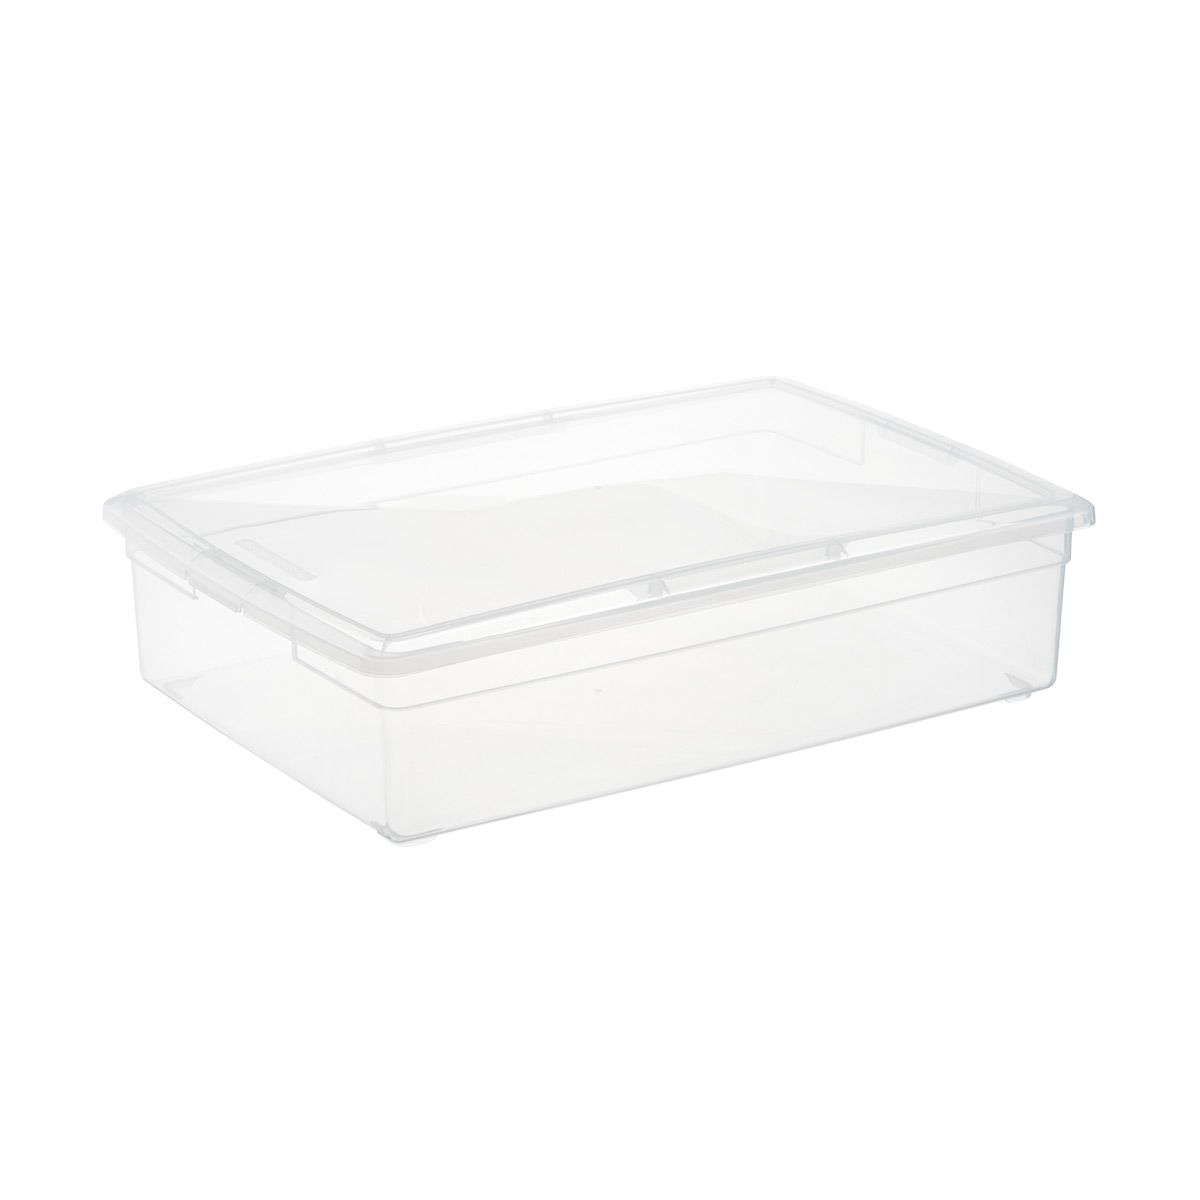 Our Boot BoxBy The Container Store4.82649 Reviews$6.98/eaOr 4 payments of $1.75 withsize:Boot Box... | The Container Store